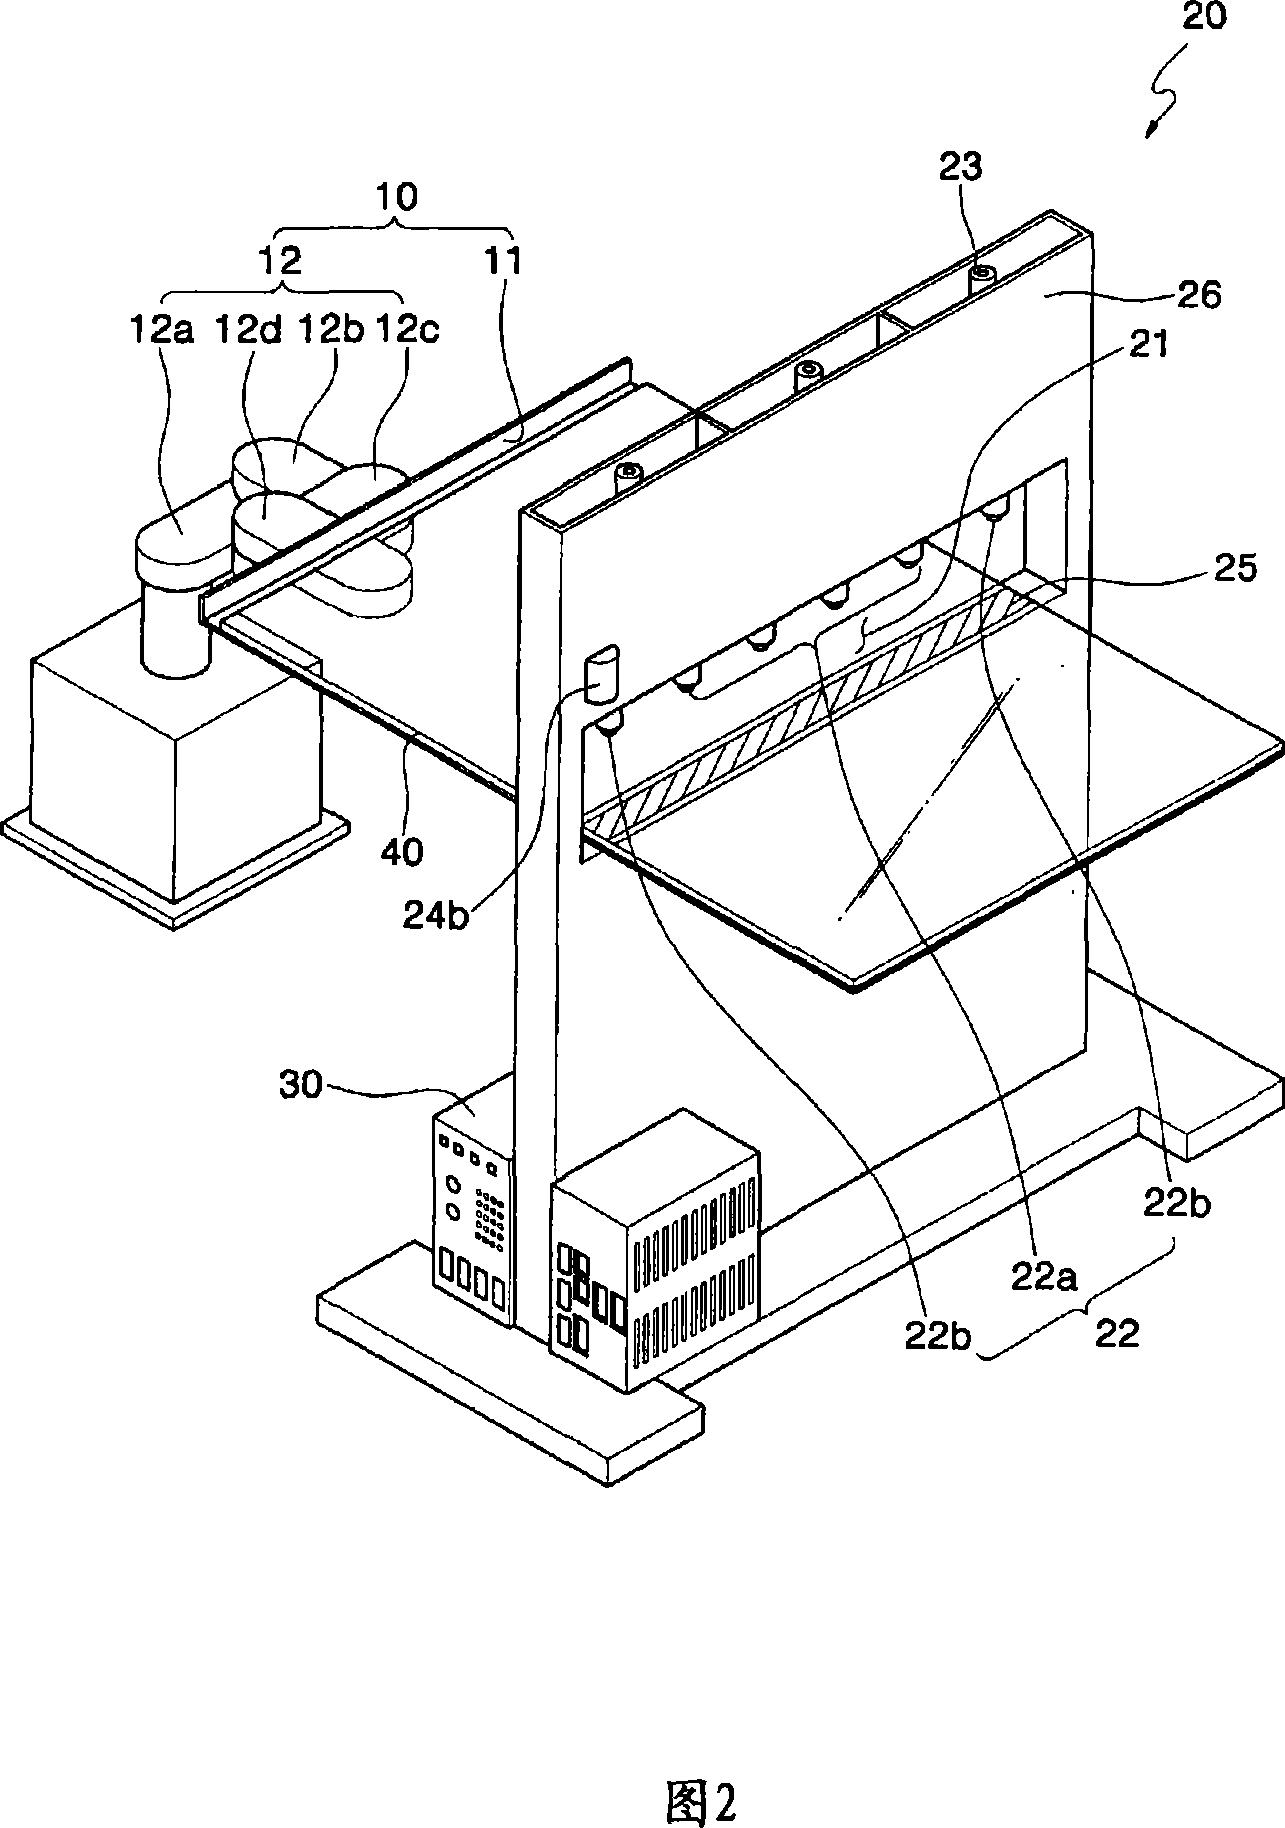 Apparatus and method for inspecting edge defect and discoloration of glass substrate